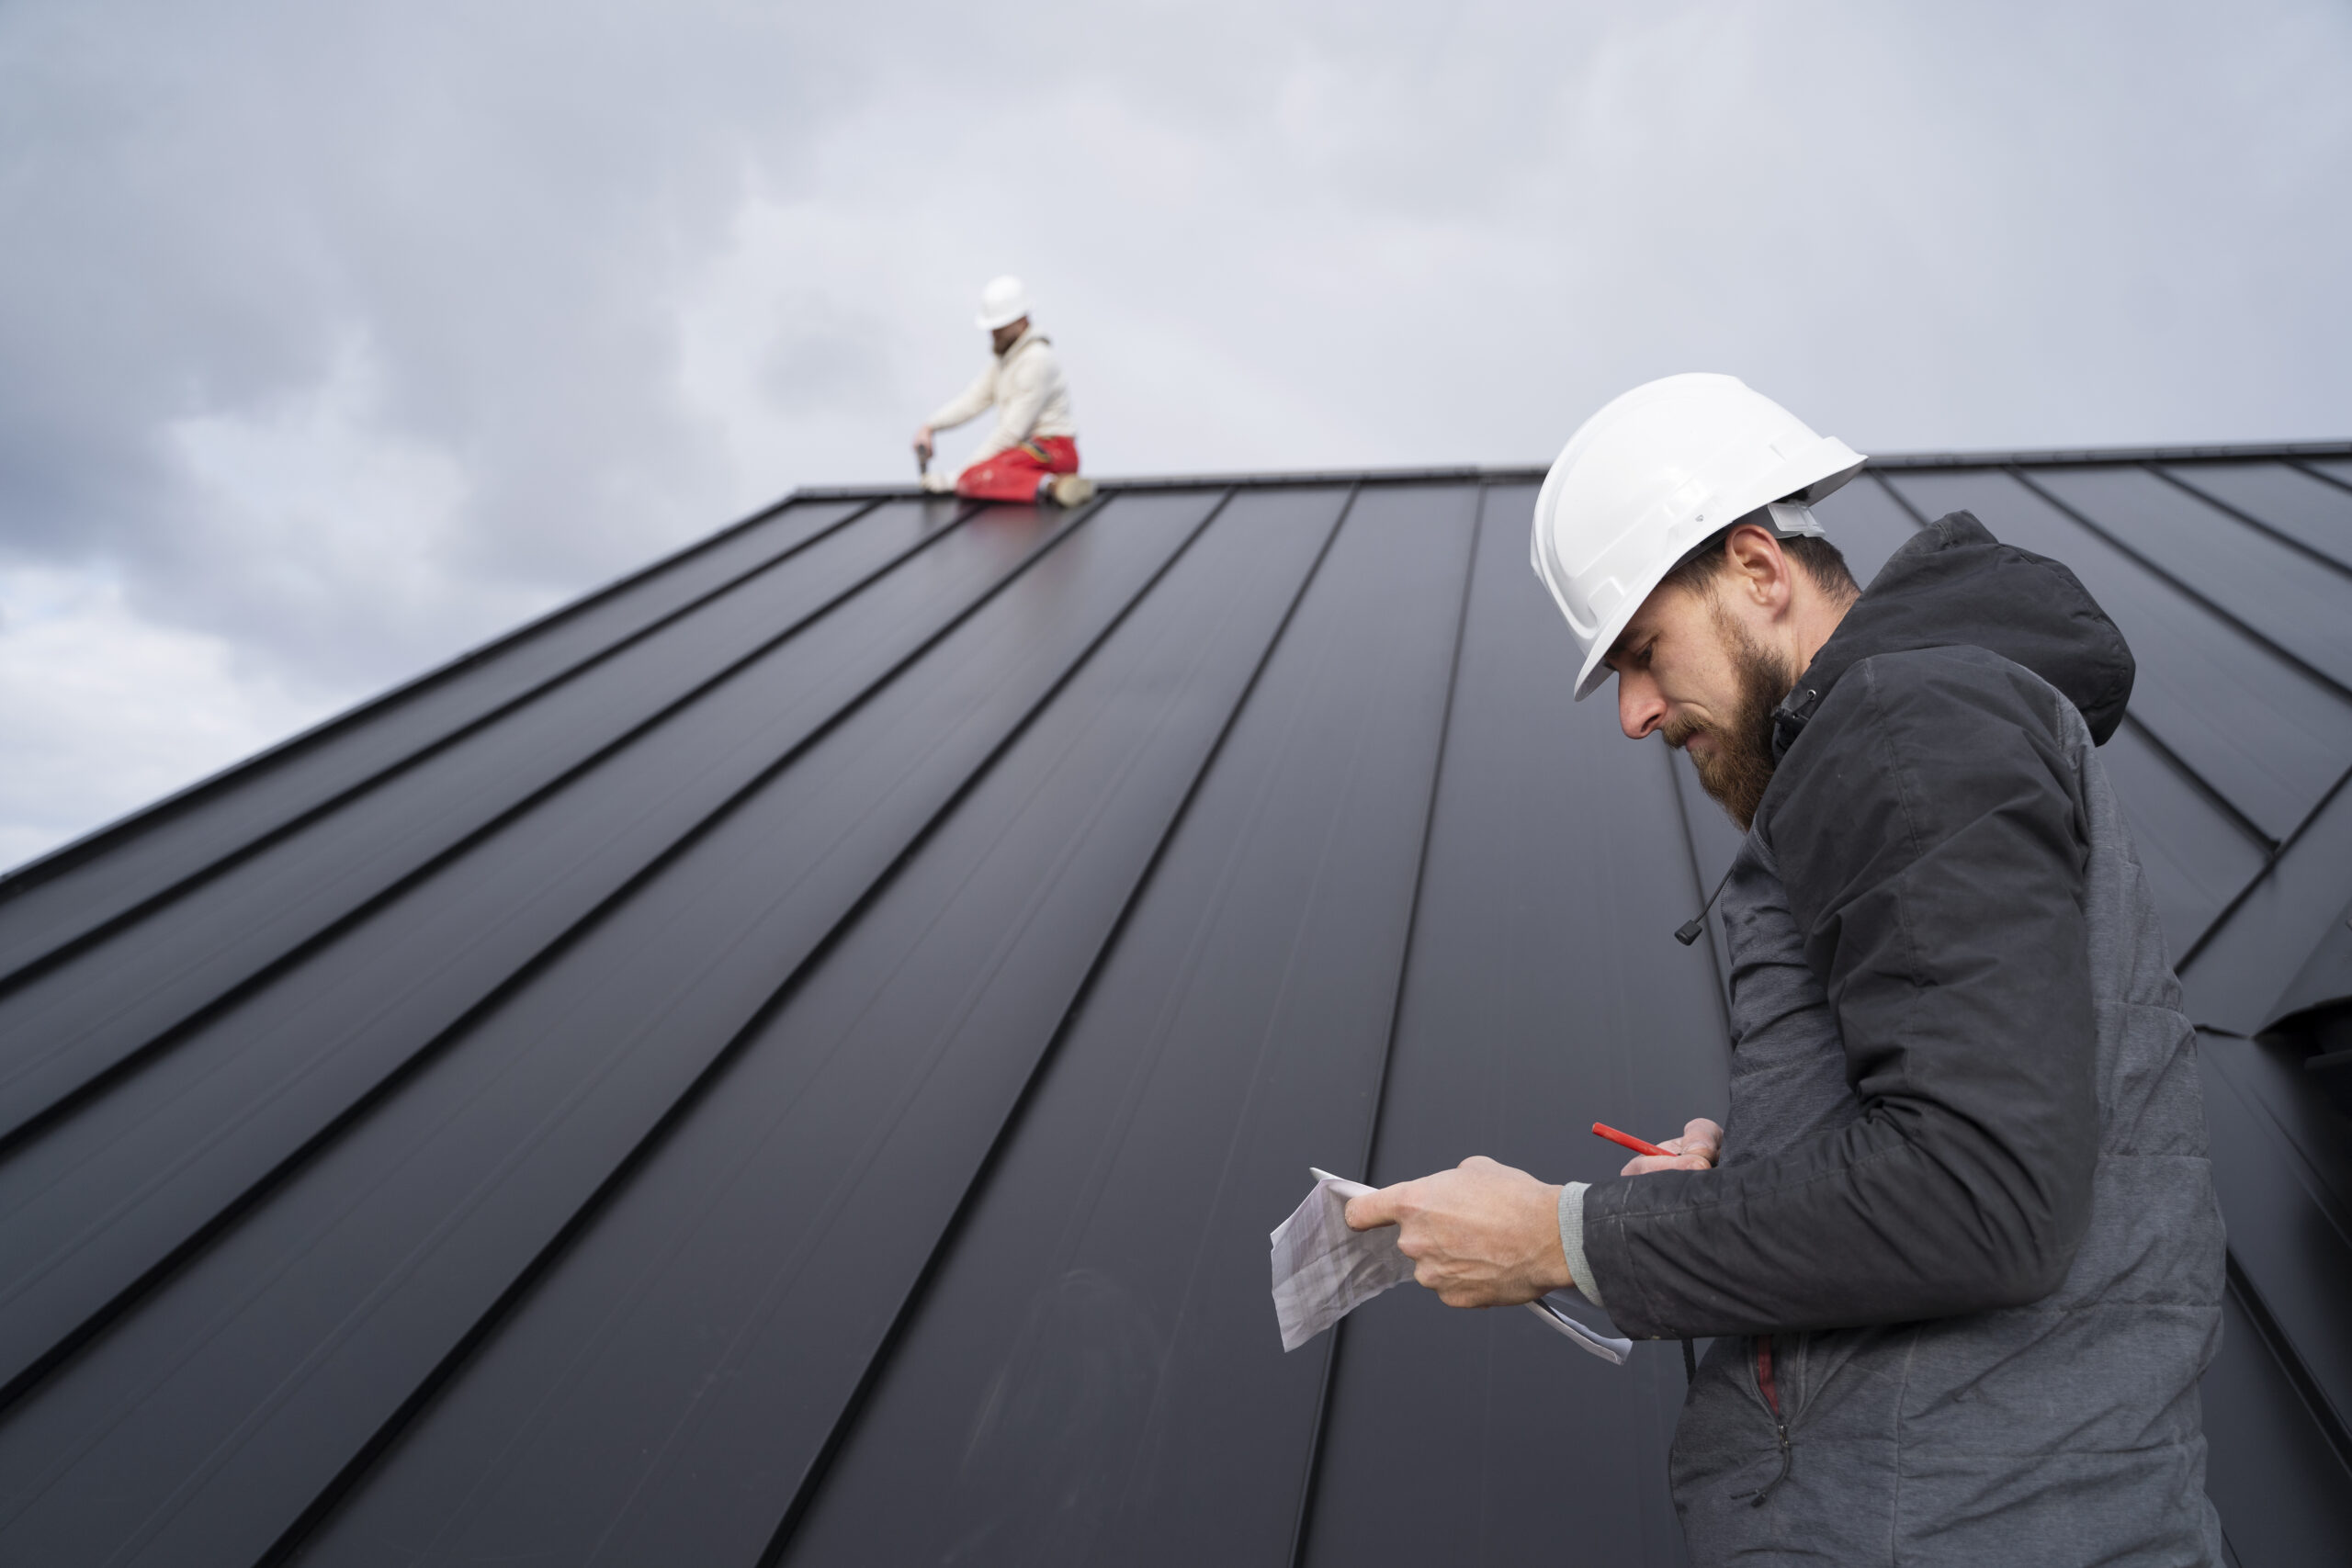 Foreman in a white hard hat and grey jacket writing on a clipboard while conducting a metal roofing inspection, with another inspector in the background examining the roof.